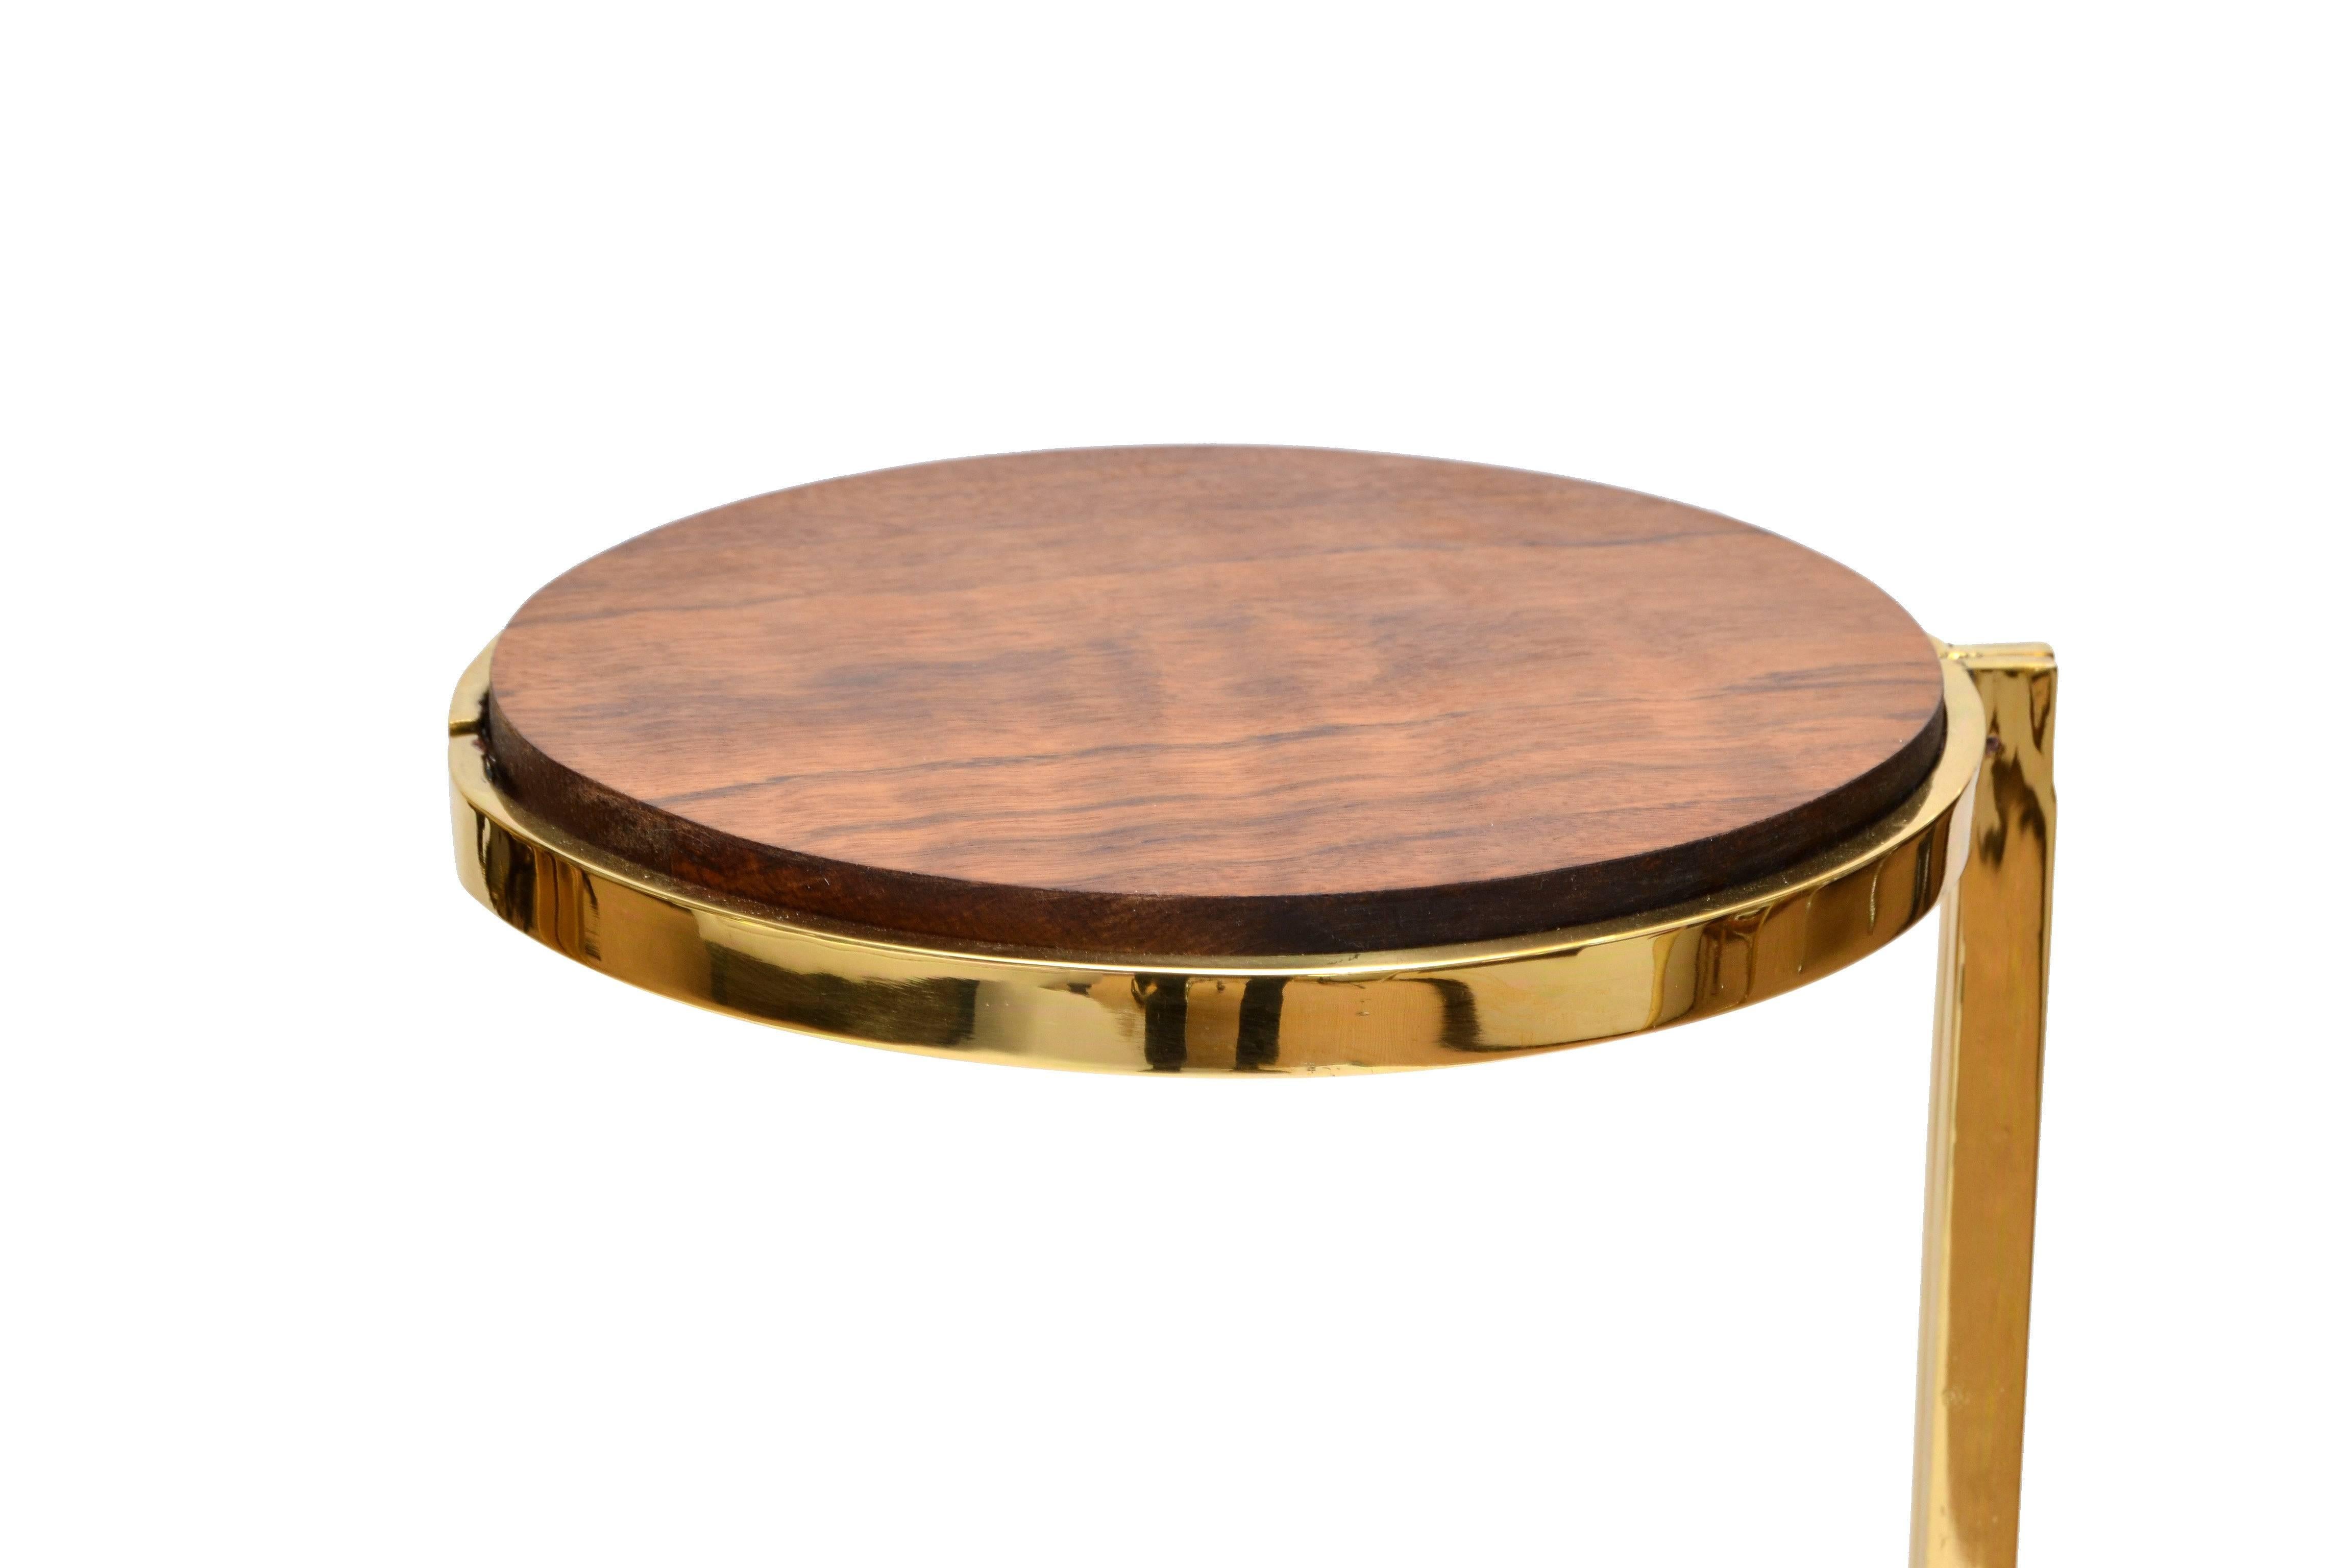 Polished Art Deco Personal Brass with Wooden Top Side Tables